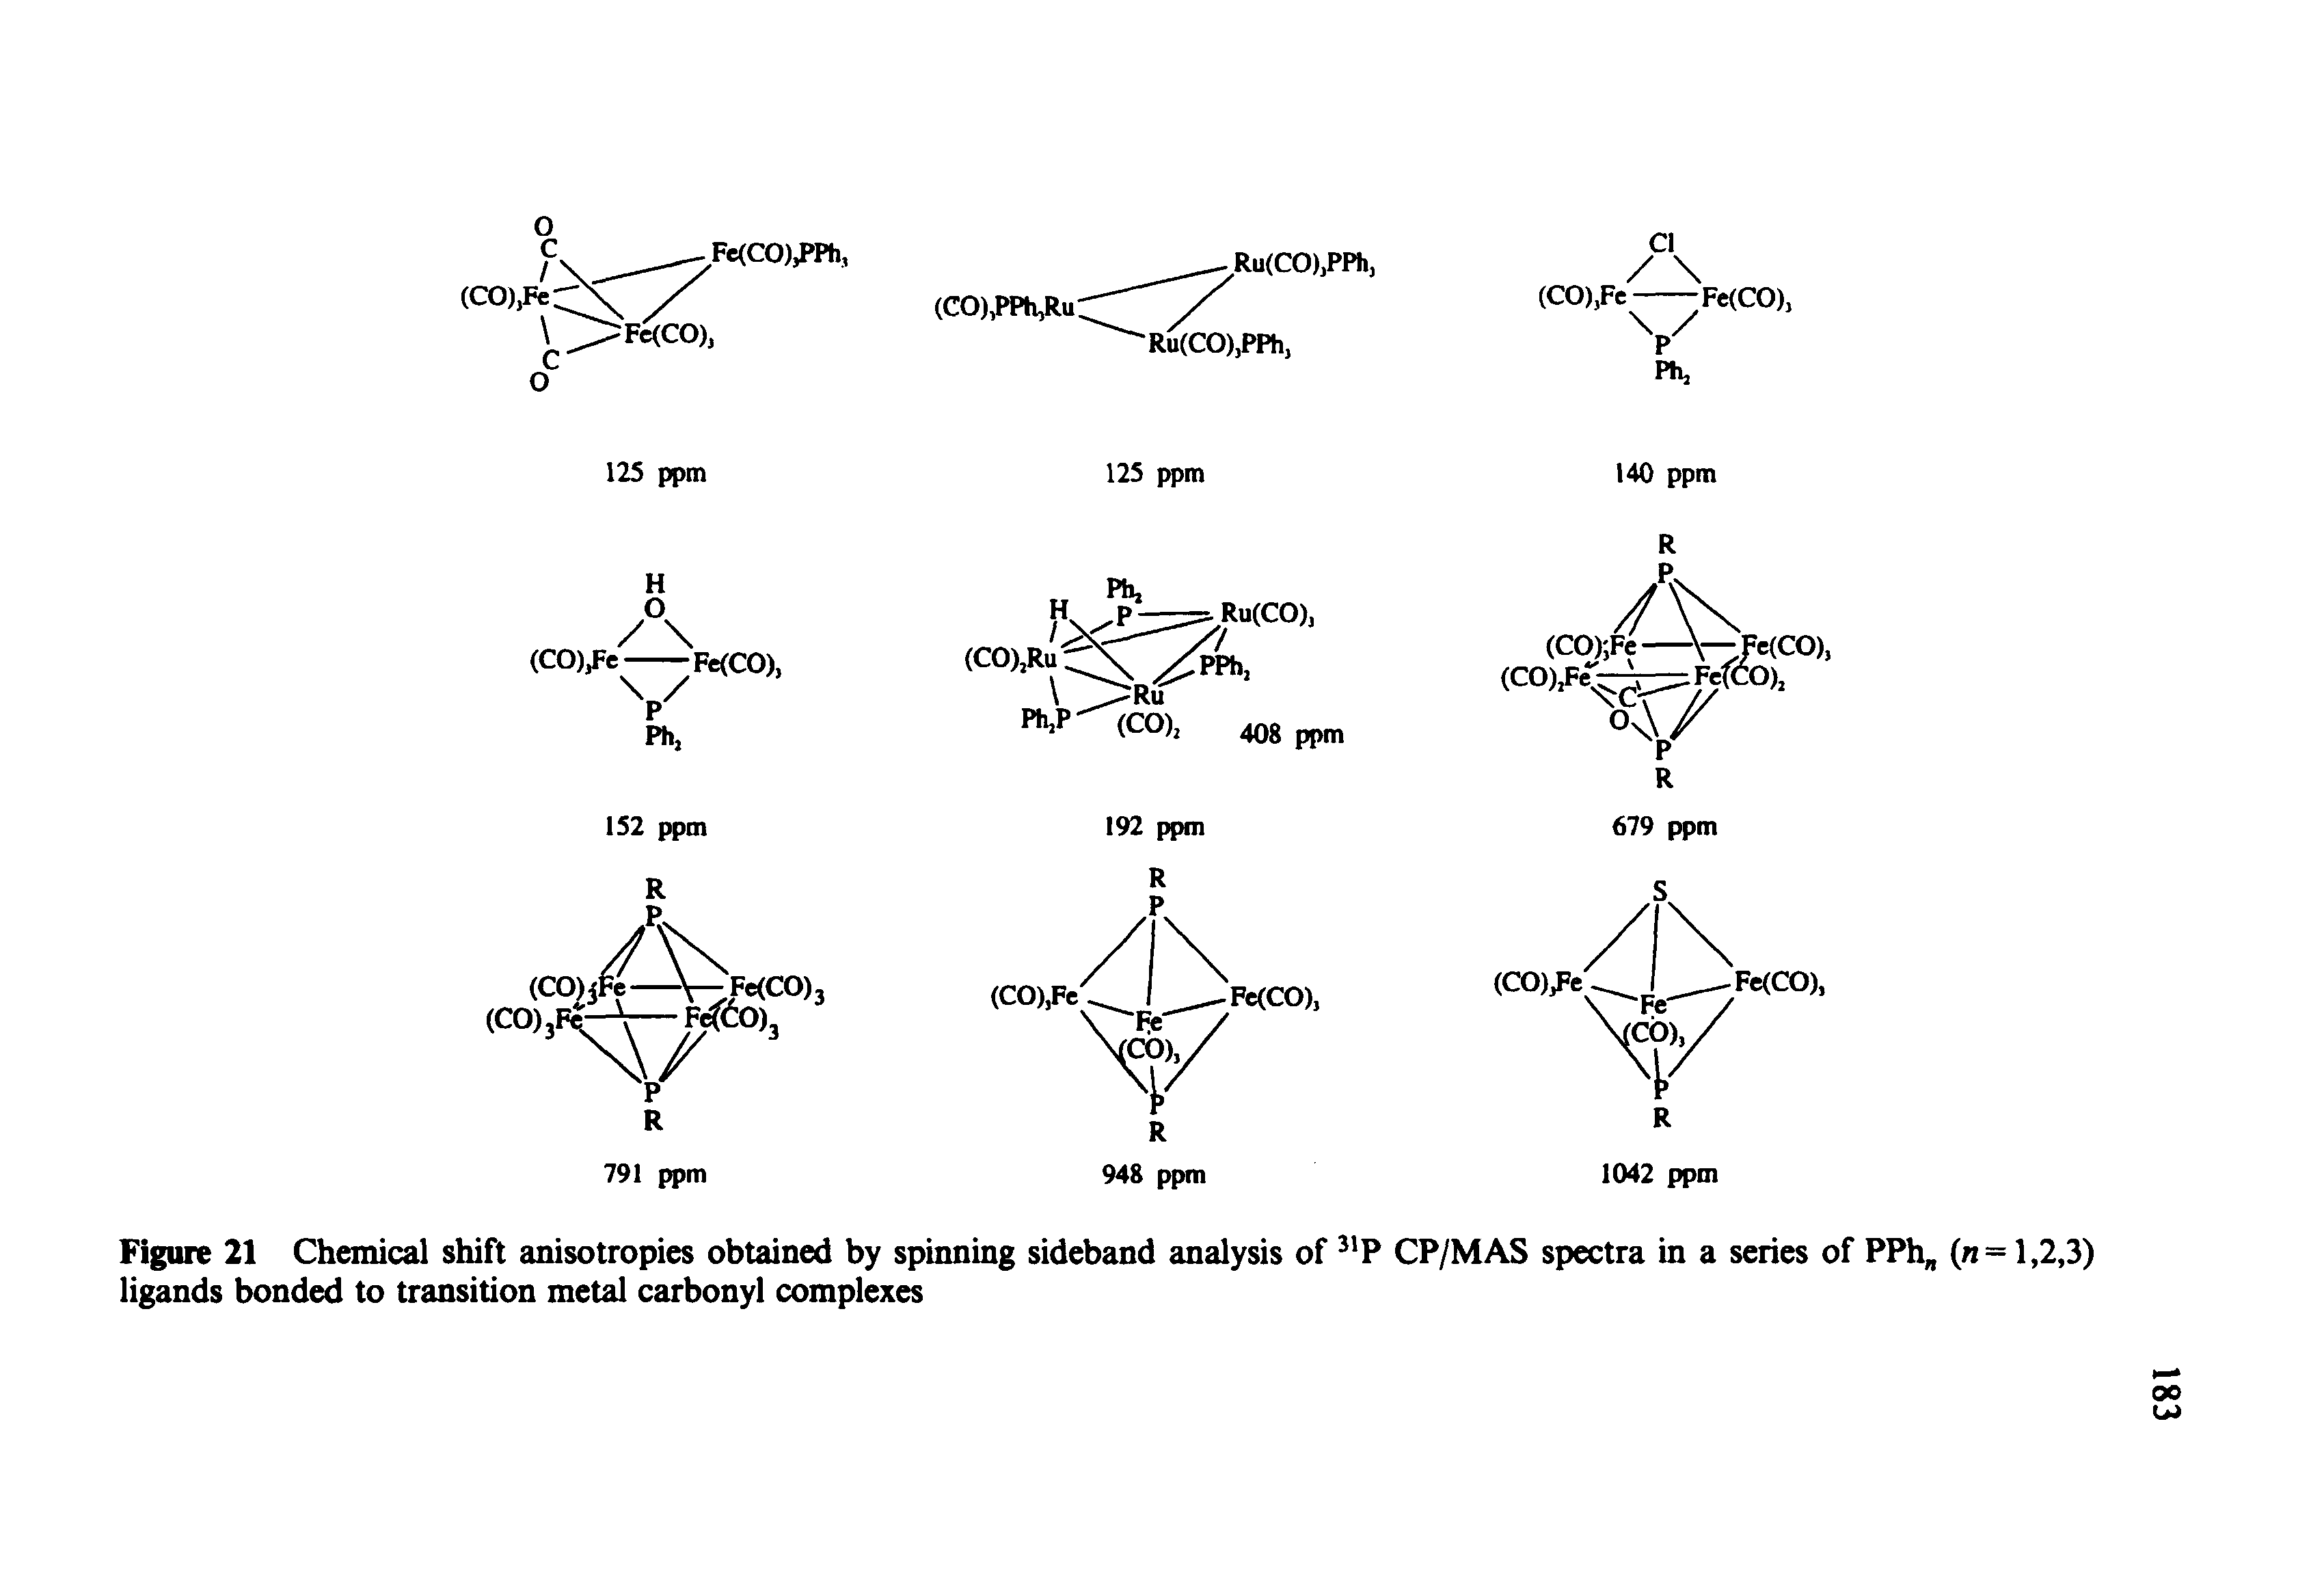 Figure 21 Chemical shift anisotropies obtained by spinning sideband analysis of CP/MAS spectra in a series of PPh (n = 1,2,3) ligands bonded to transition metal carbonyl complexes...